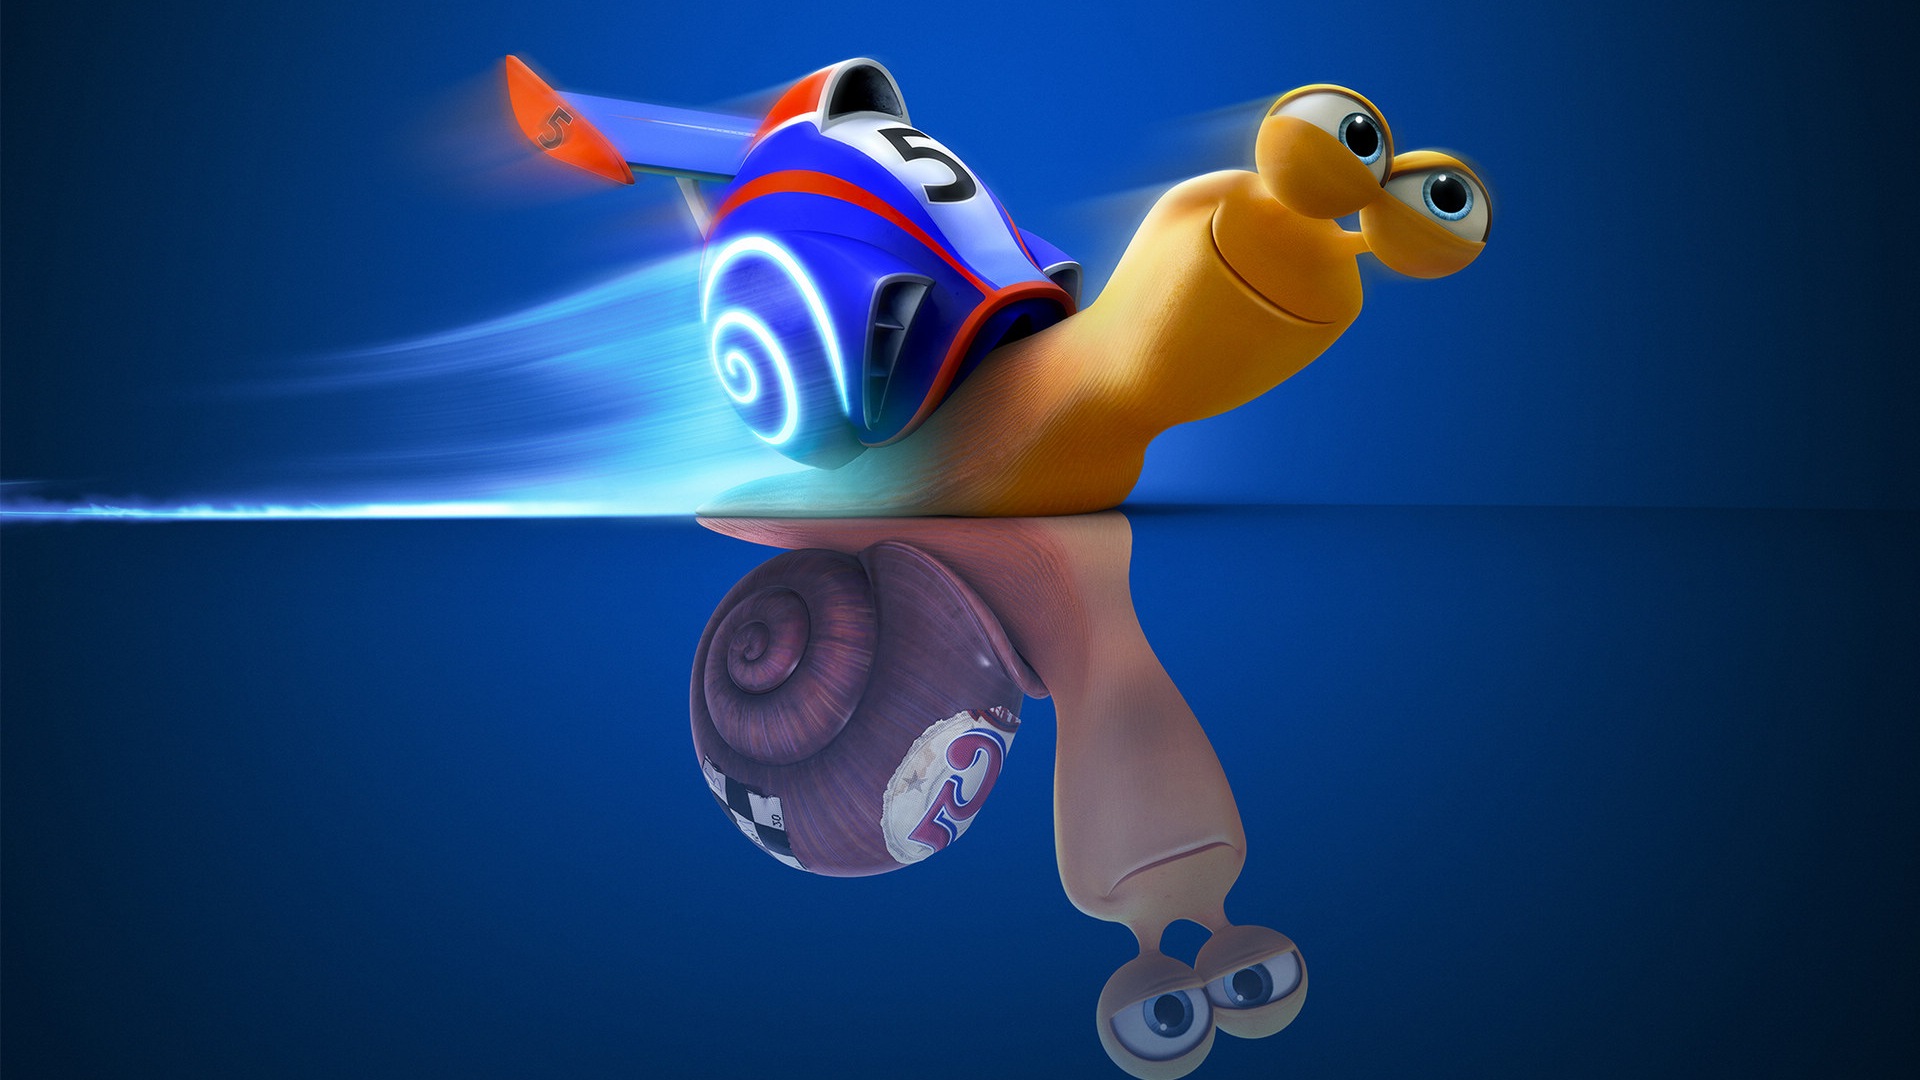 Turbo 3D movie HD wallpapers #4 - 1920x1080